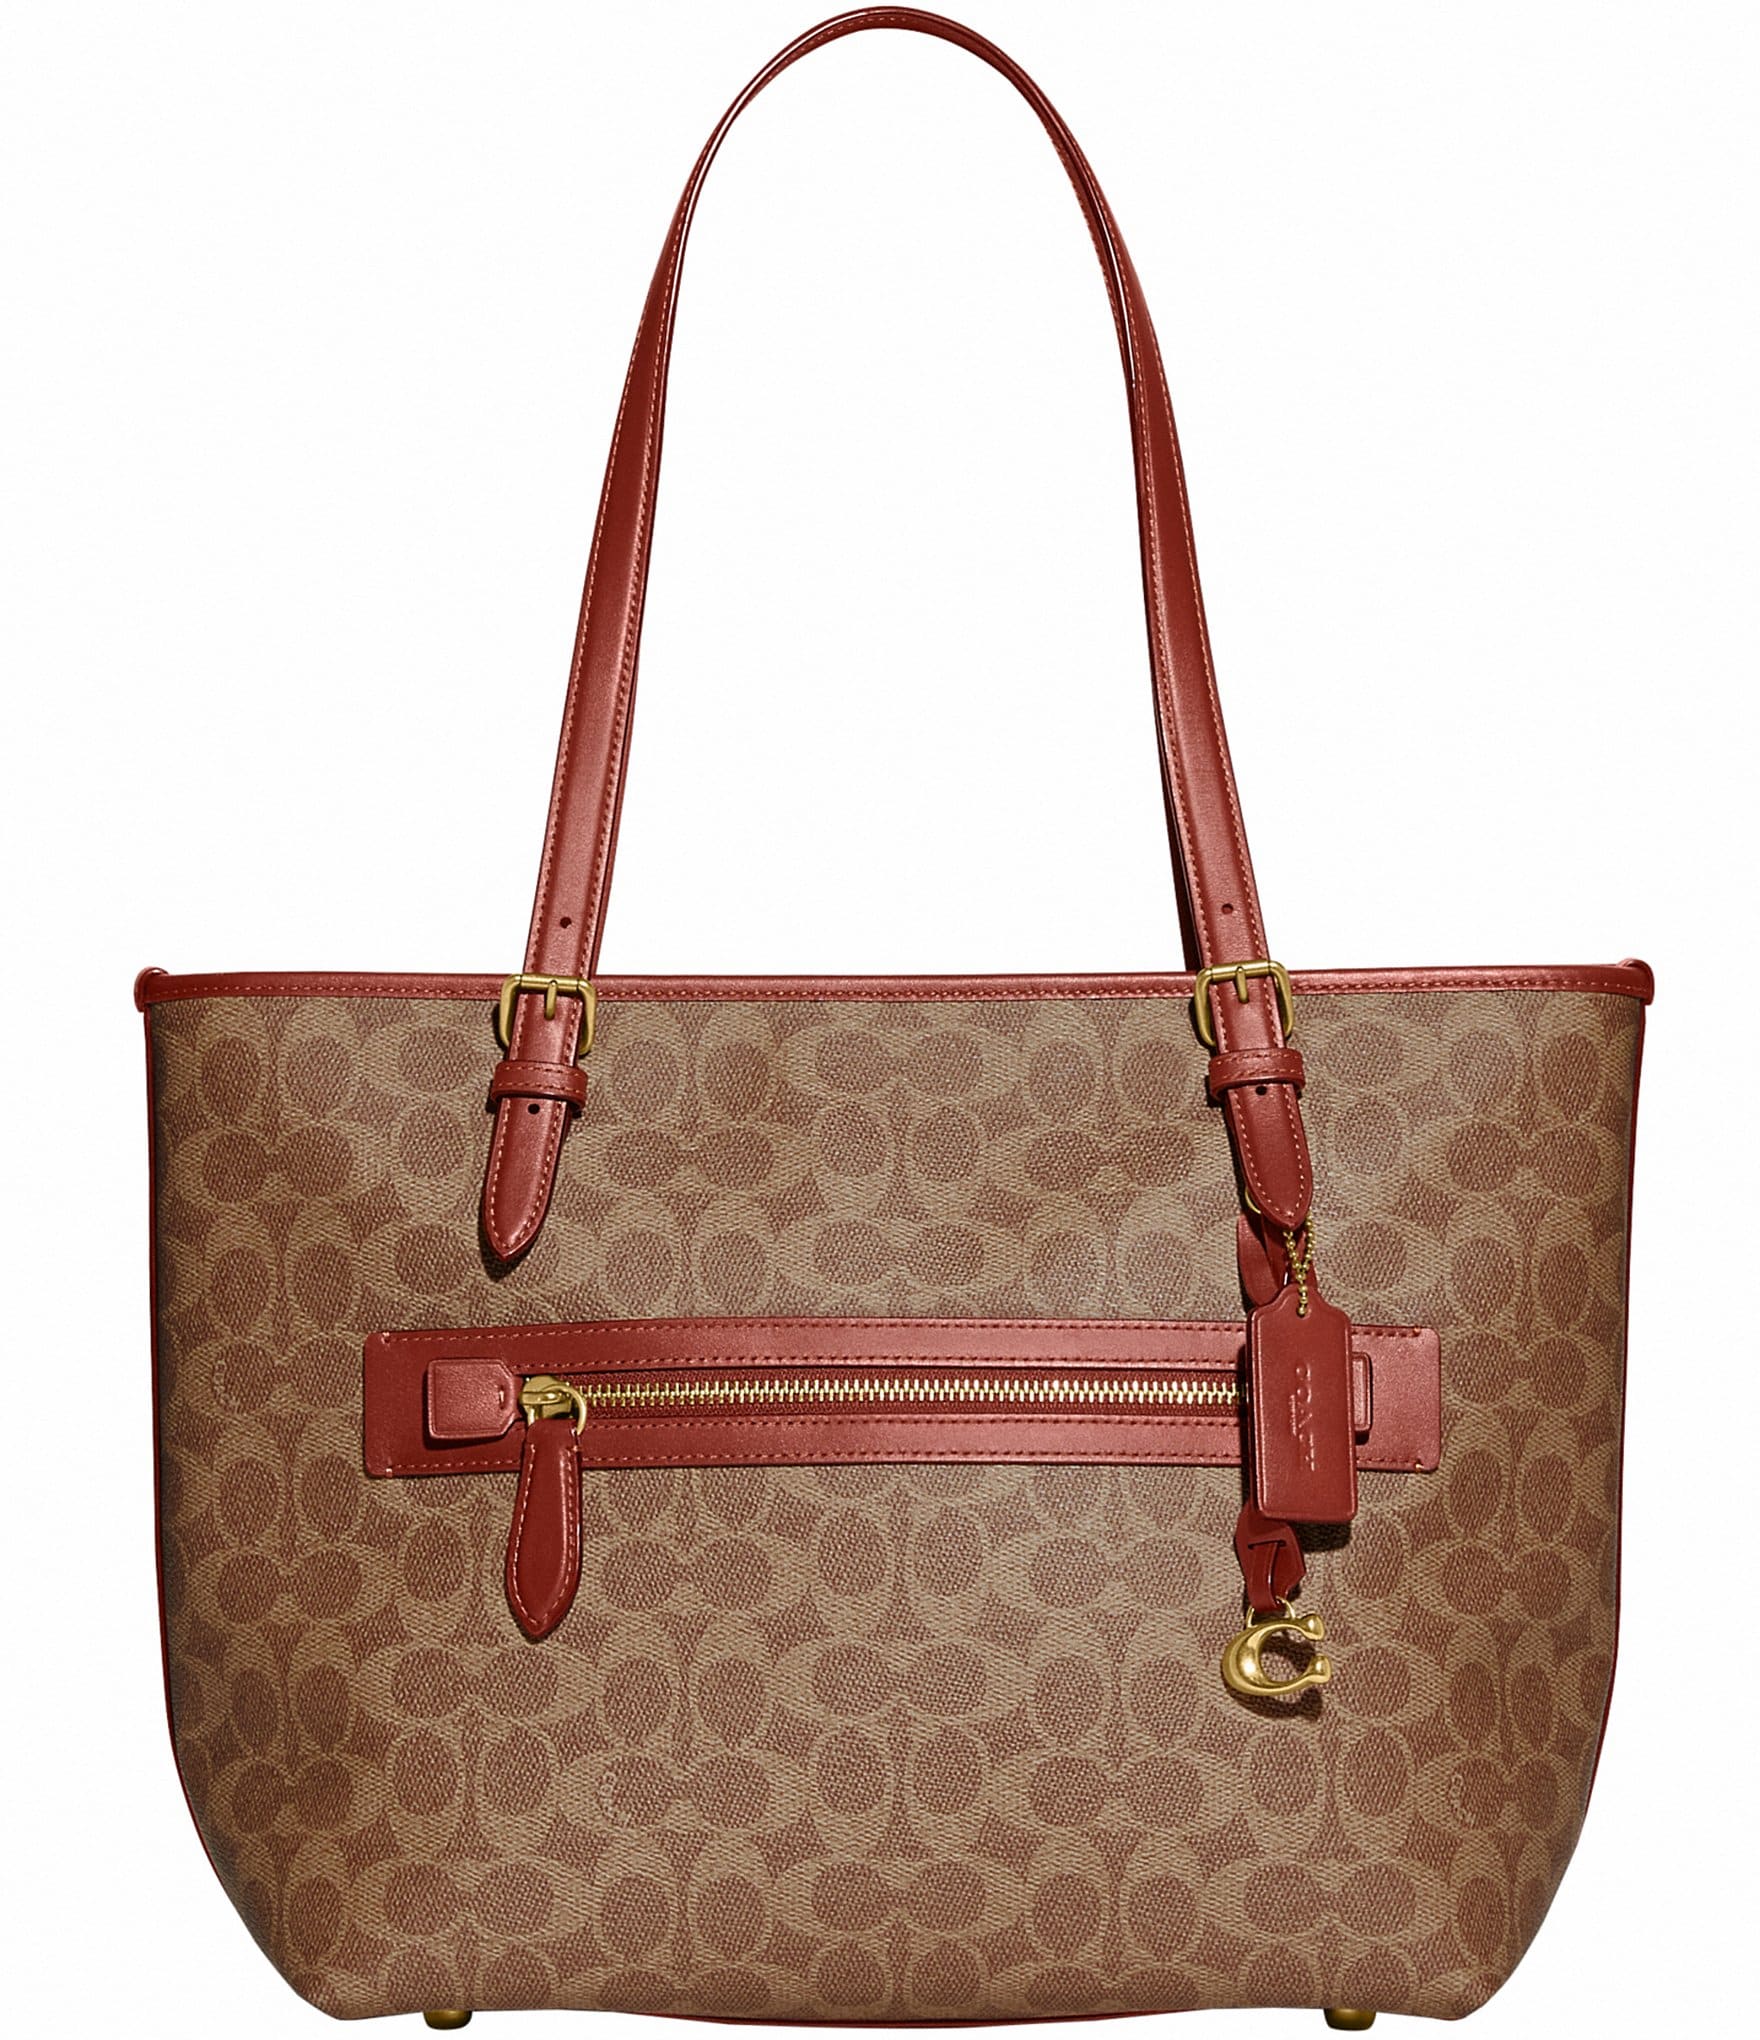 This Famous Coach Tote Bag Is 60% Off Right Now | Us Weekly